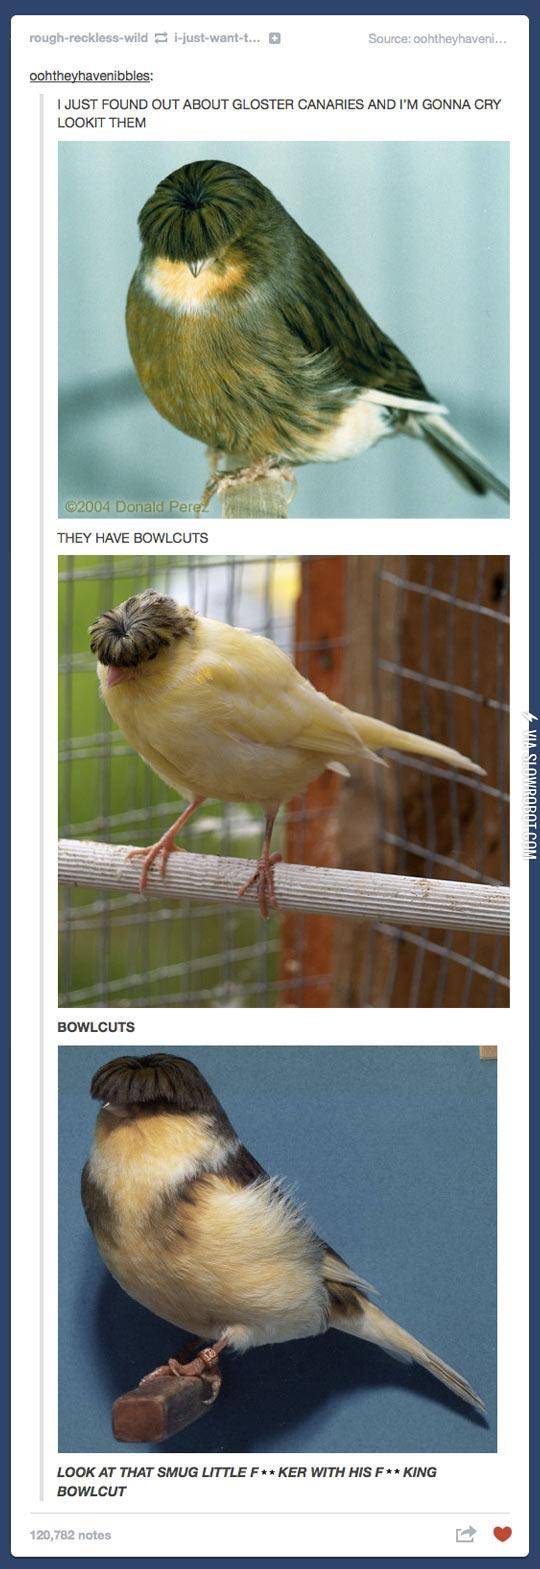 tumblr - bird with bowl haircut - roughrecklesswild 1justwantt... Source oohtheyhaveni... oohtheyhavenibbles I Just Found Out About Gloster Canaries And I'M Gonna Cry Lookit Them 2004 Donald Perez They Have Bowlcuts Via Slowporot.Com Bowlcuts Look At That